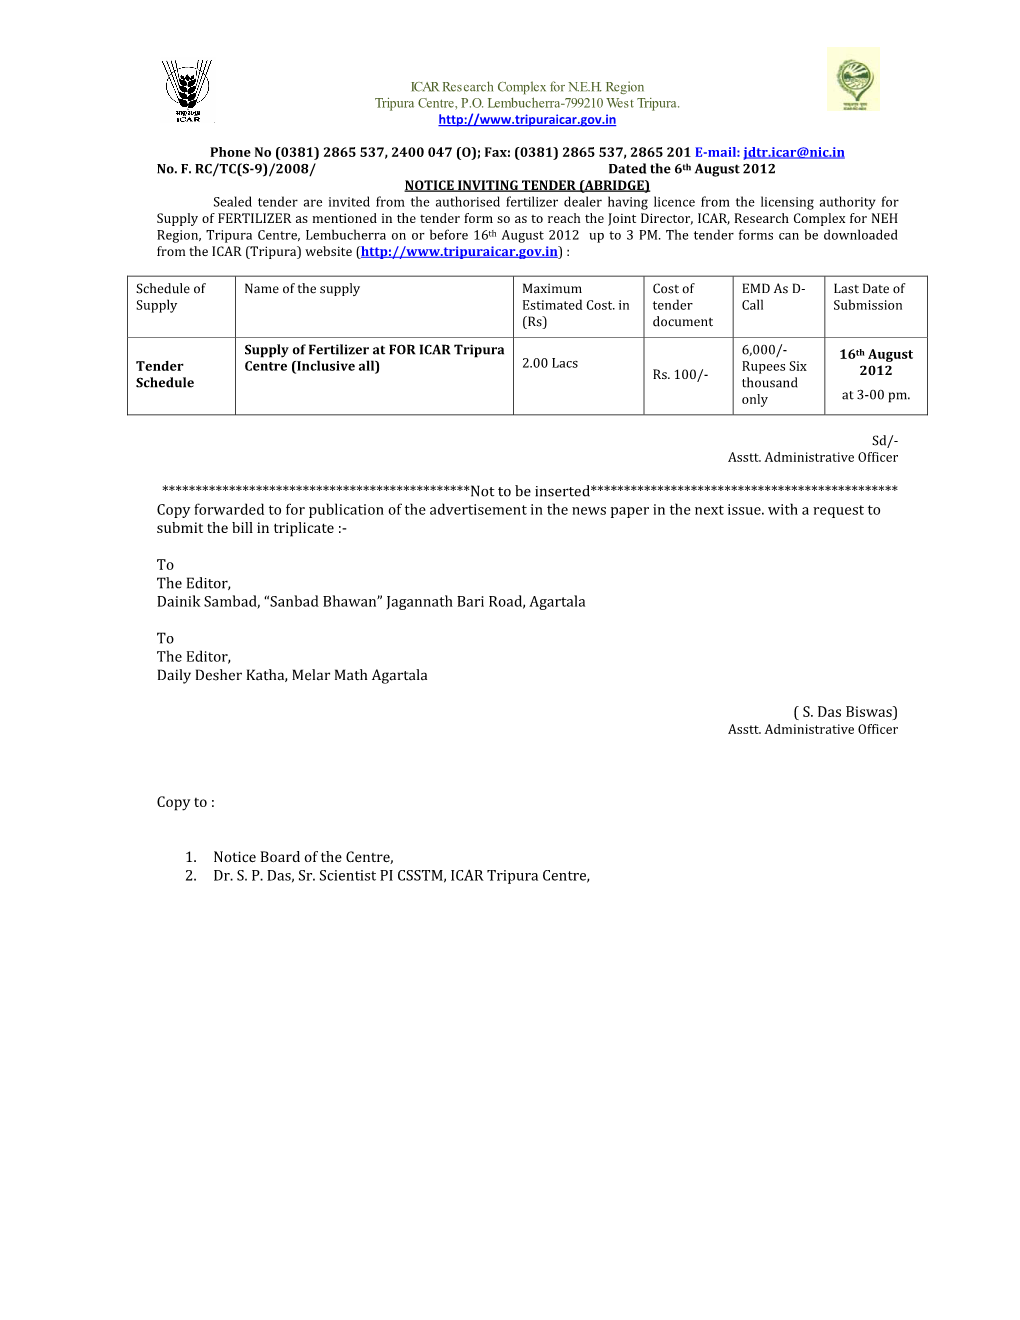 Notice Inviting Tender for Purchase of Fertilizer